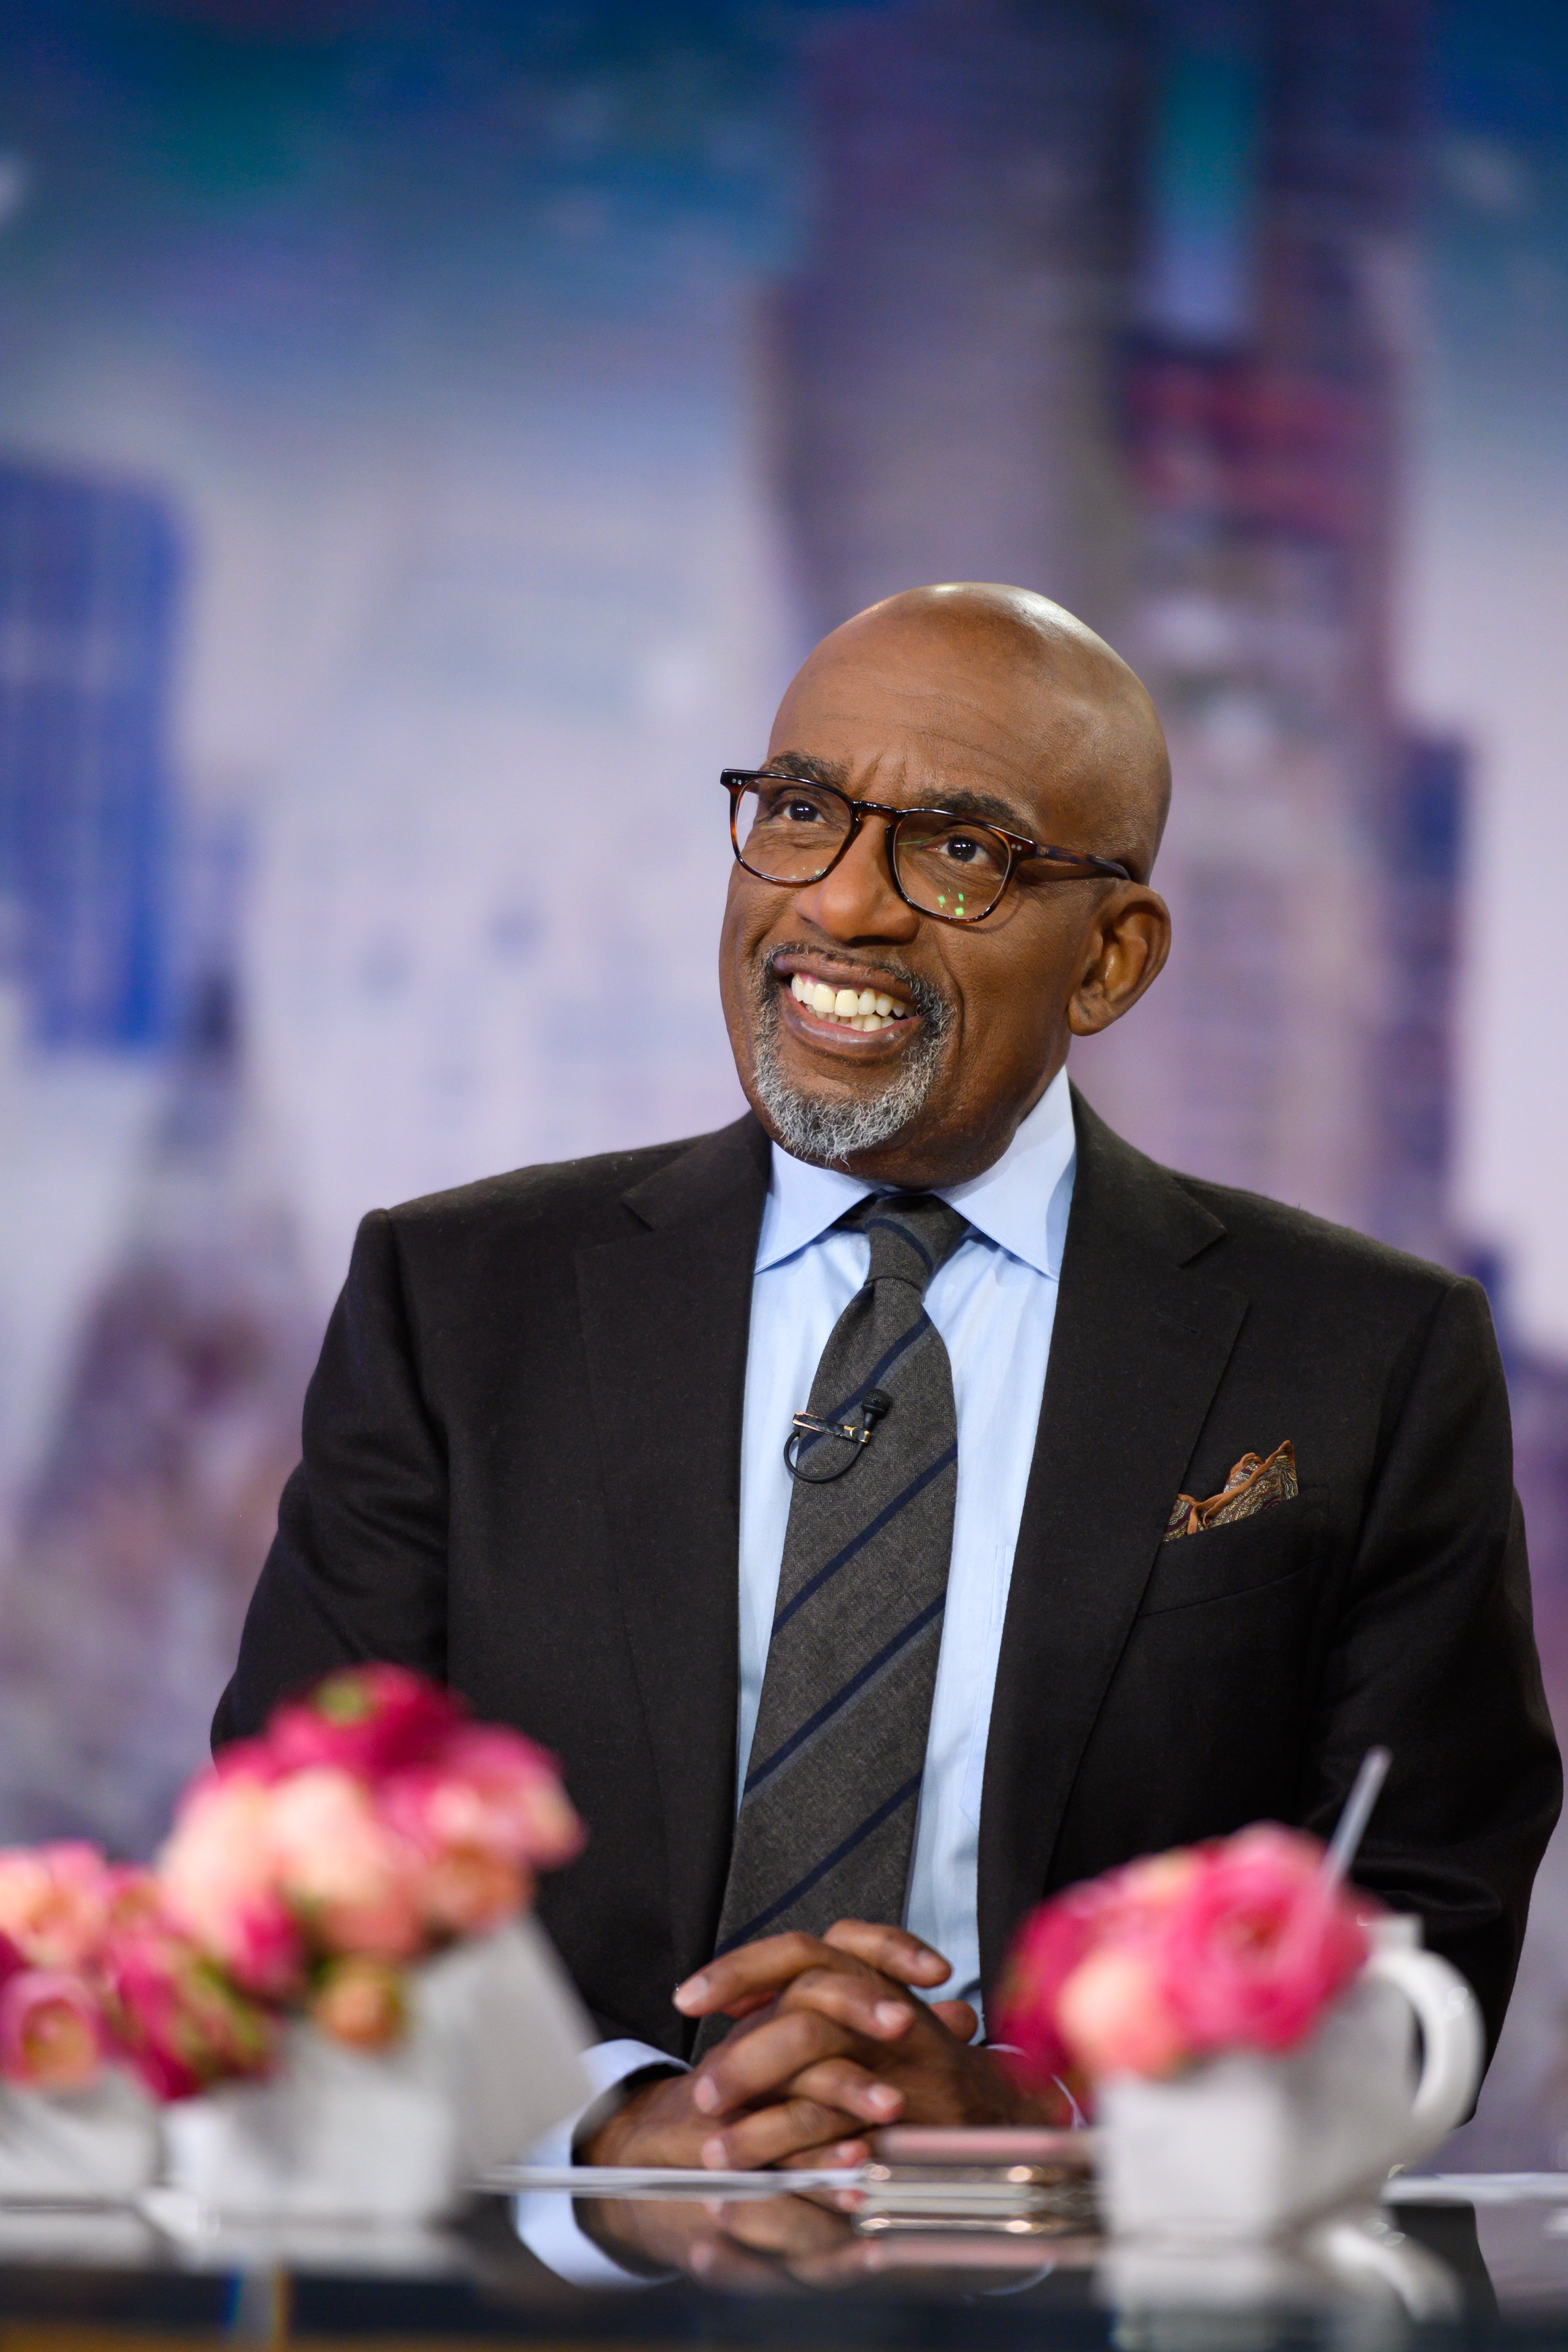 Al Roker pictured on Wednesday, February 11, 2020. | Source: Getty Images.